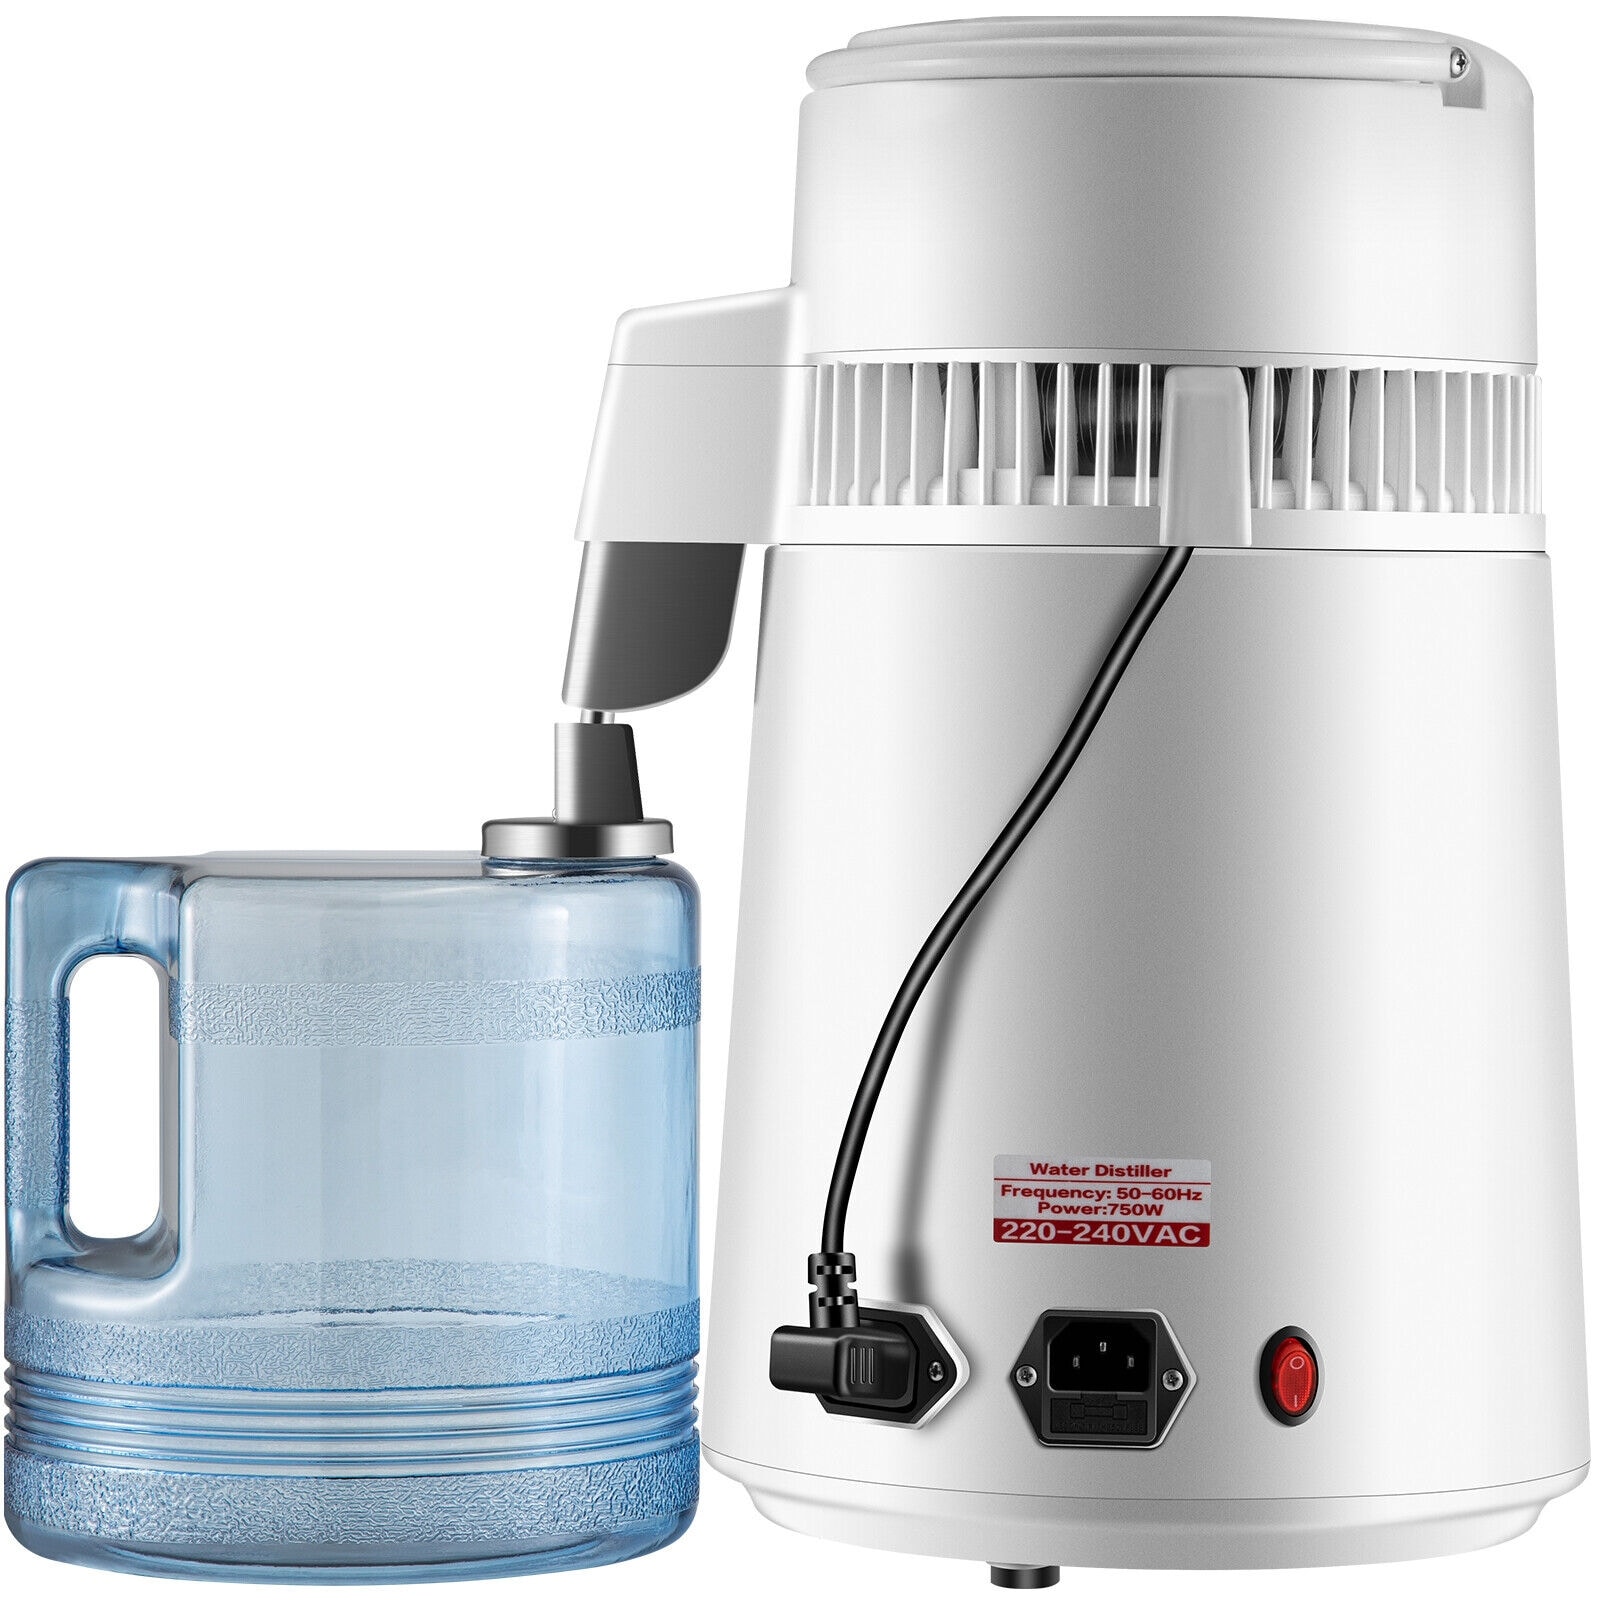 https://ak1.ostkcdn.com/images/products/is/images/direct/b2b0307e70765d3ac42d8cf911efdf65b4d85e89/VEVOR-Pure-Water-Distiller-Purifier-Filter-1.1-Gal--4L-750W-Fully-Upgraded-with-Handle-BPA-Free-Container-Home-Use-White.jpg